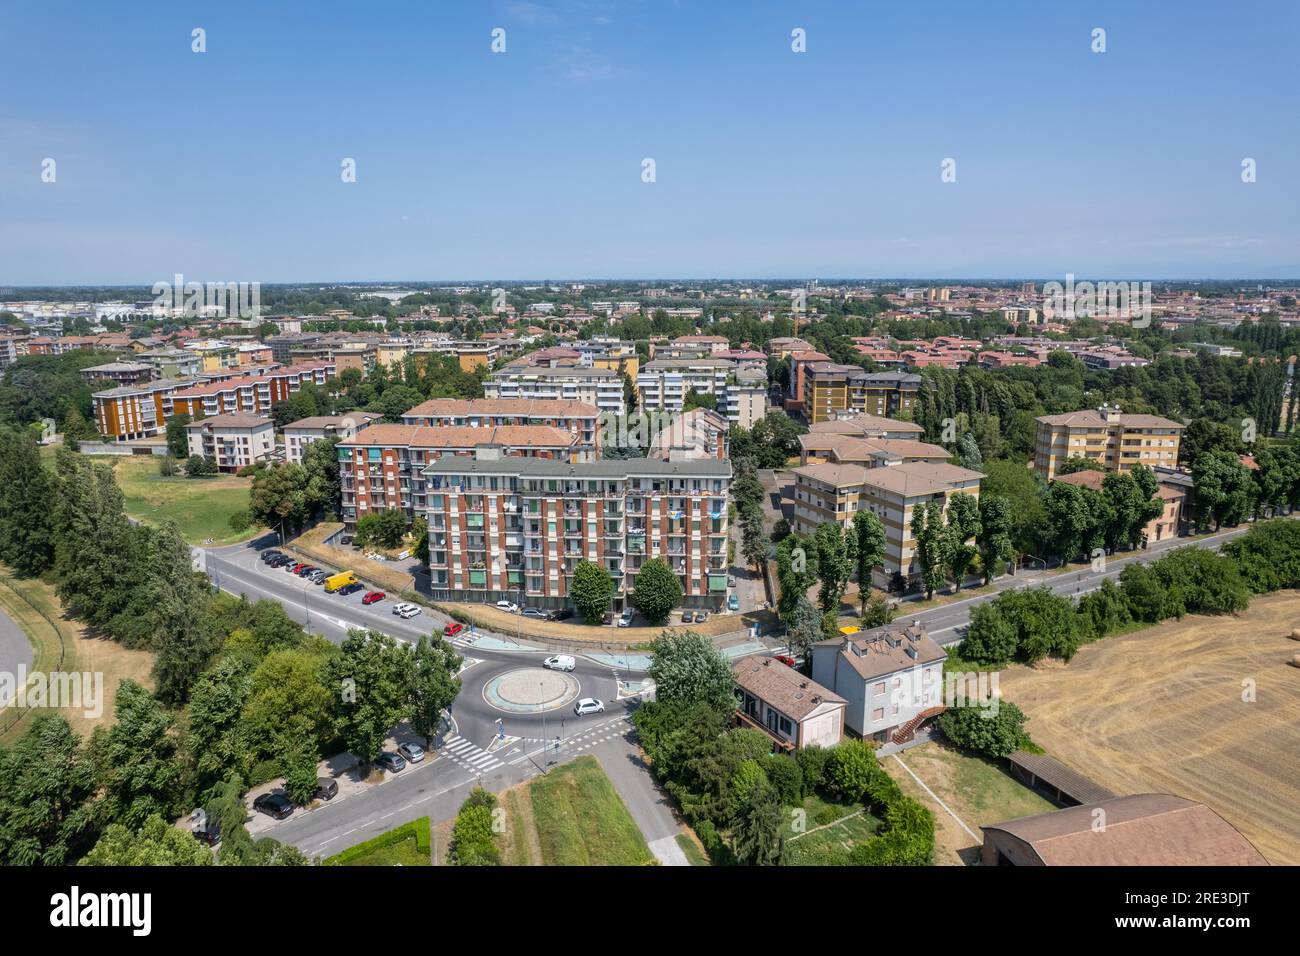 View of Po neighboorhood in Cremona, Italy. Drone aerial shot. Stock Photo